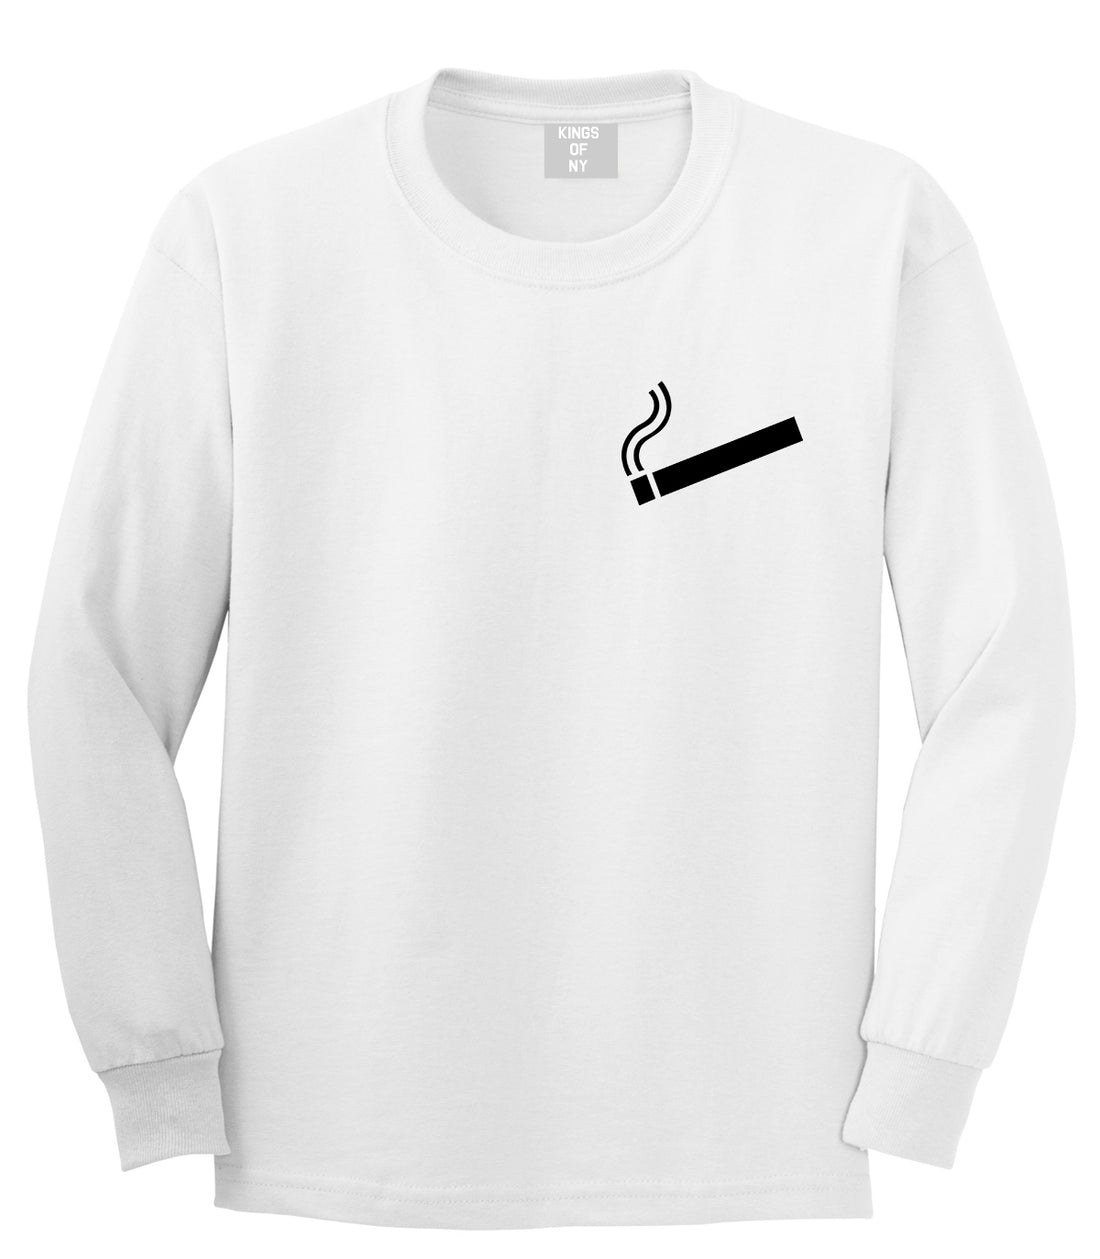 Cigarette Chest White Long Sleeve T-Shirt by Kings Of NY